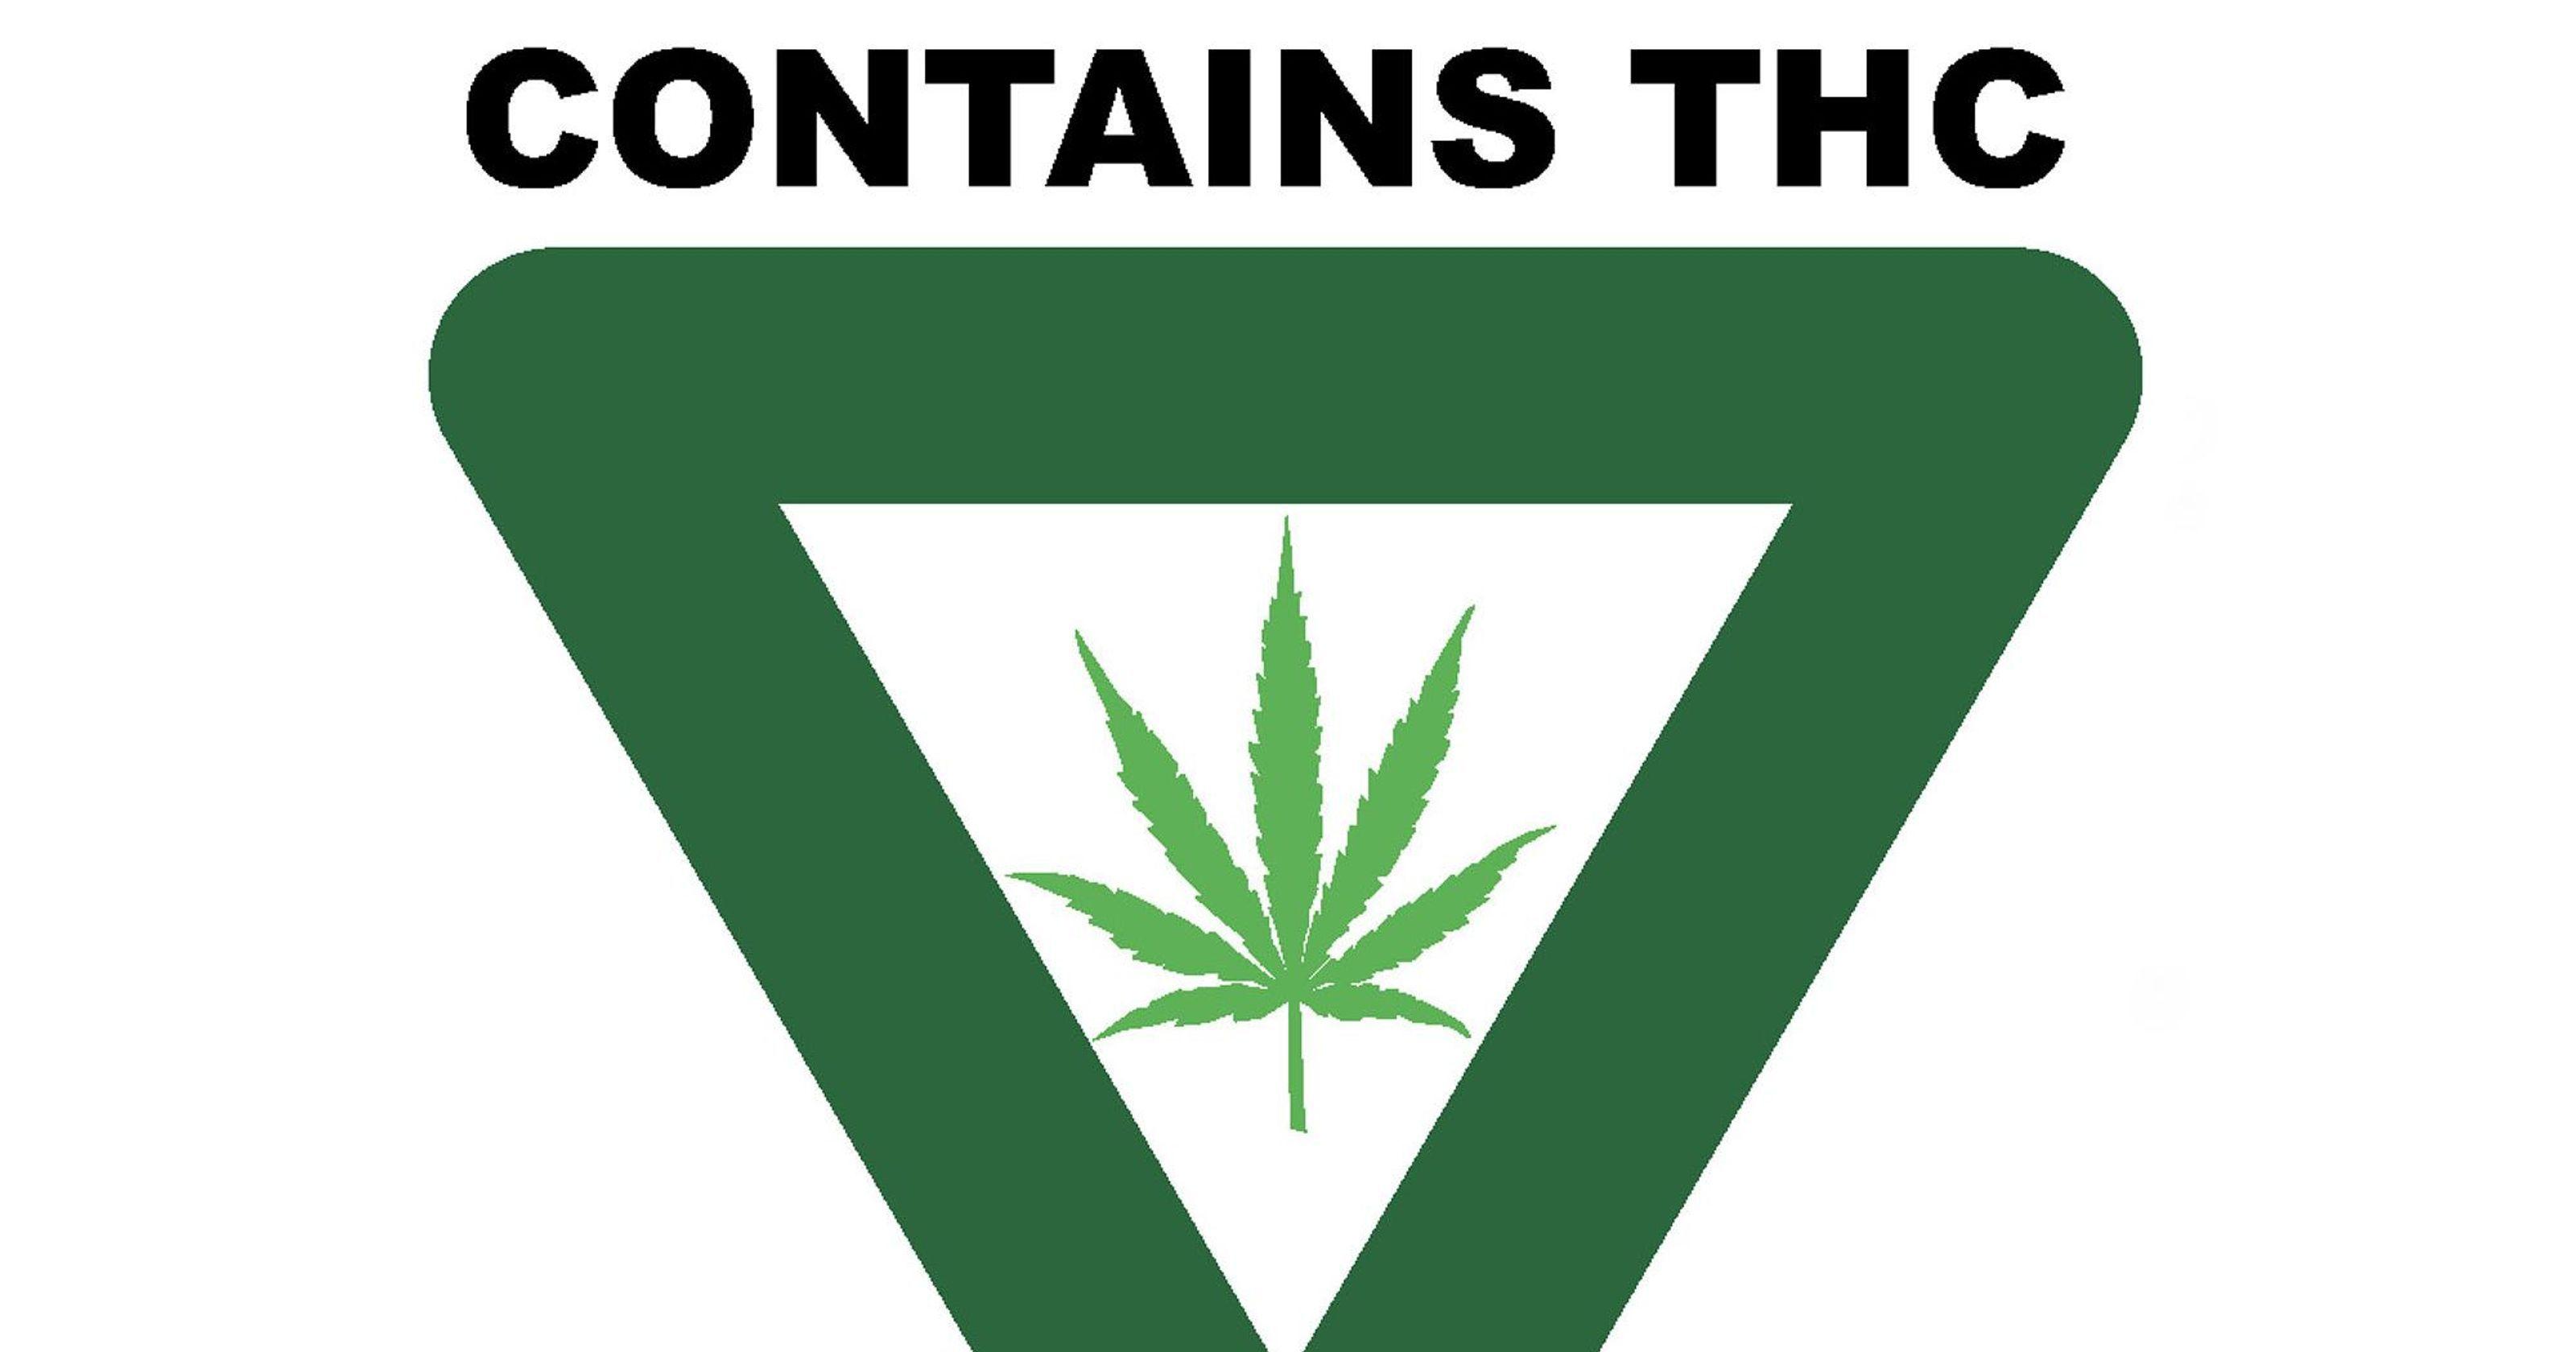 Upside Down Green Triangle Logo - Upside down, green triangle and cannabis leaf becomes pot symbol